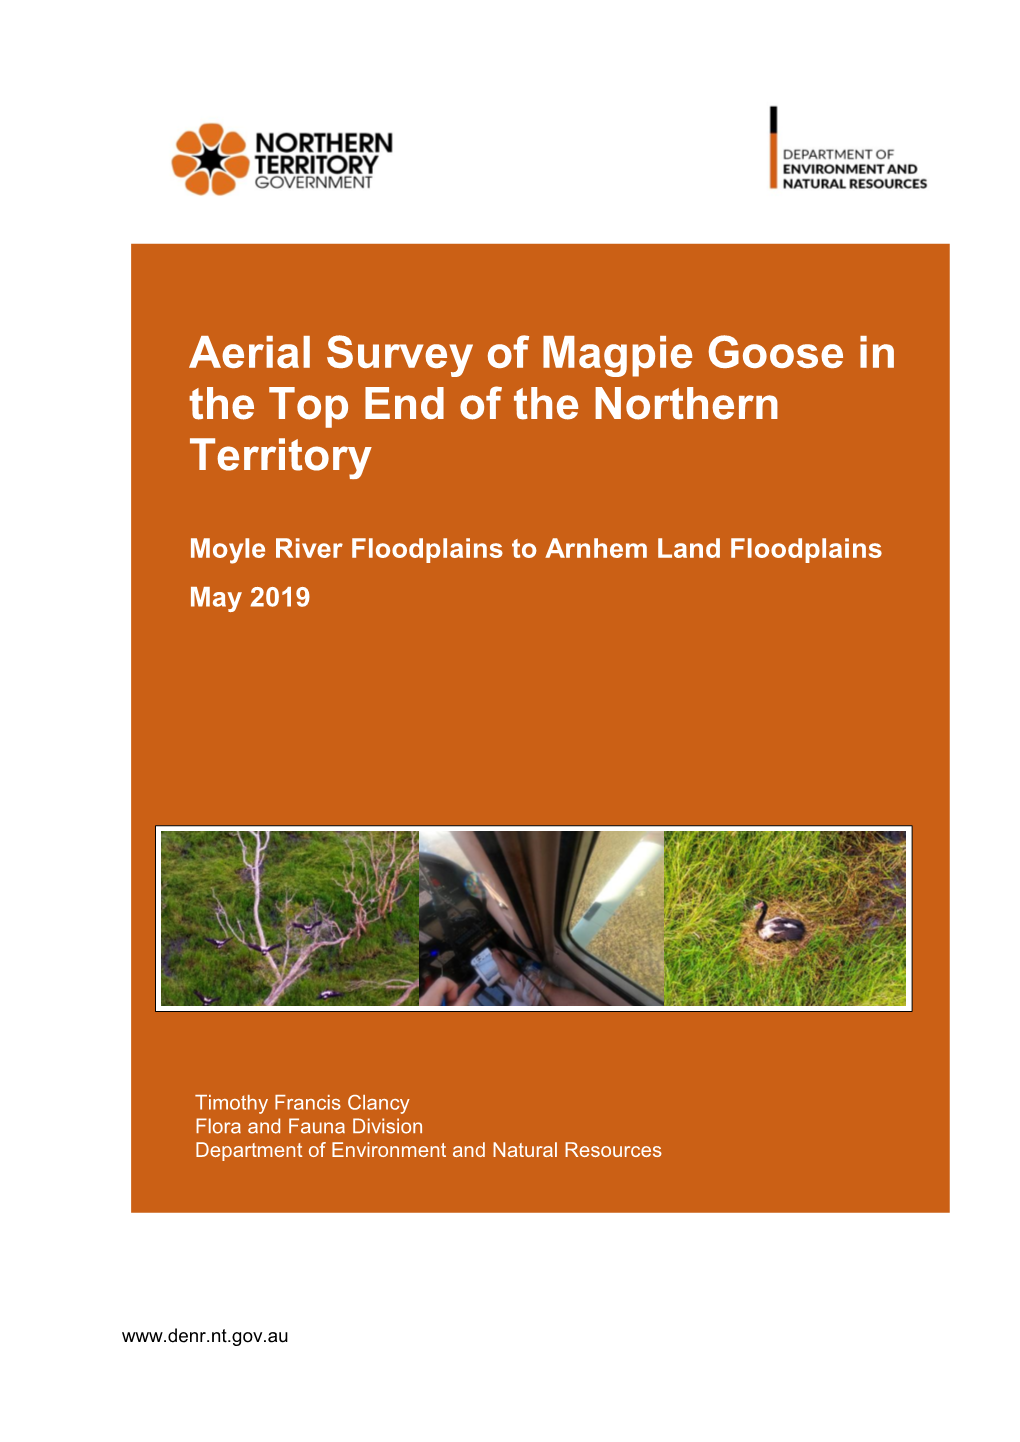 Aerial Survey of Magpie Goose in the Top End of the Northern Territory